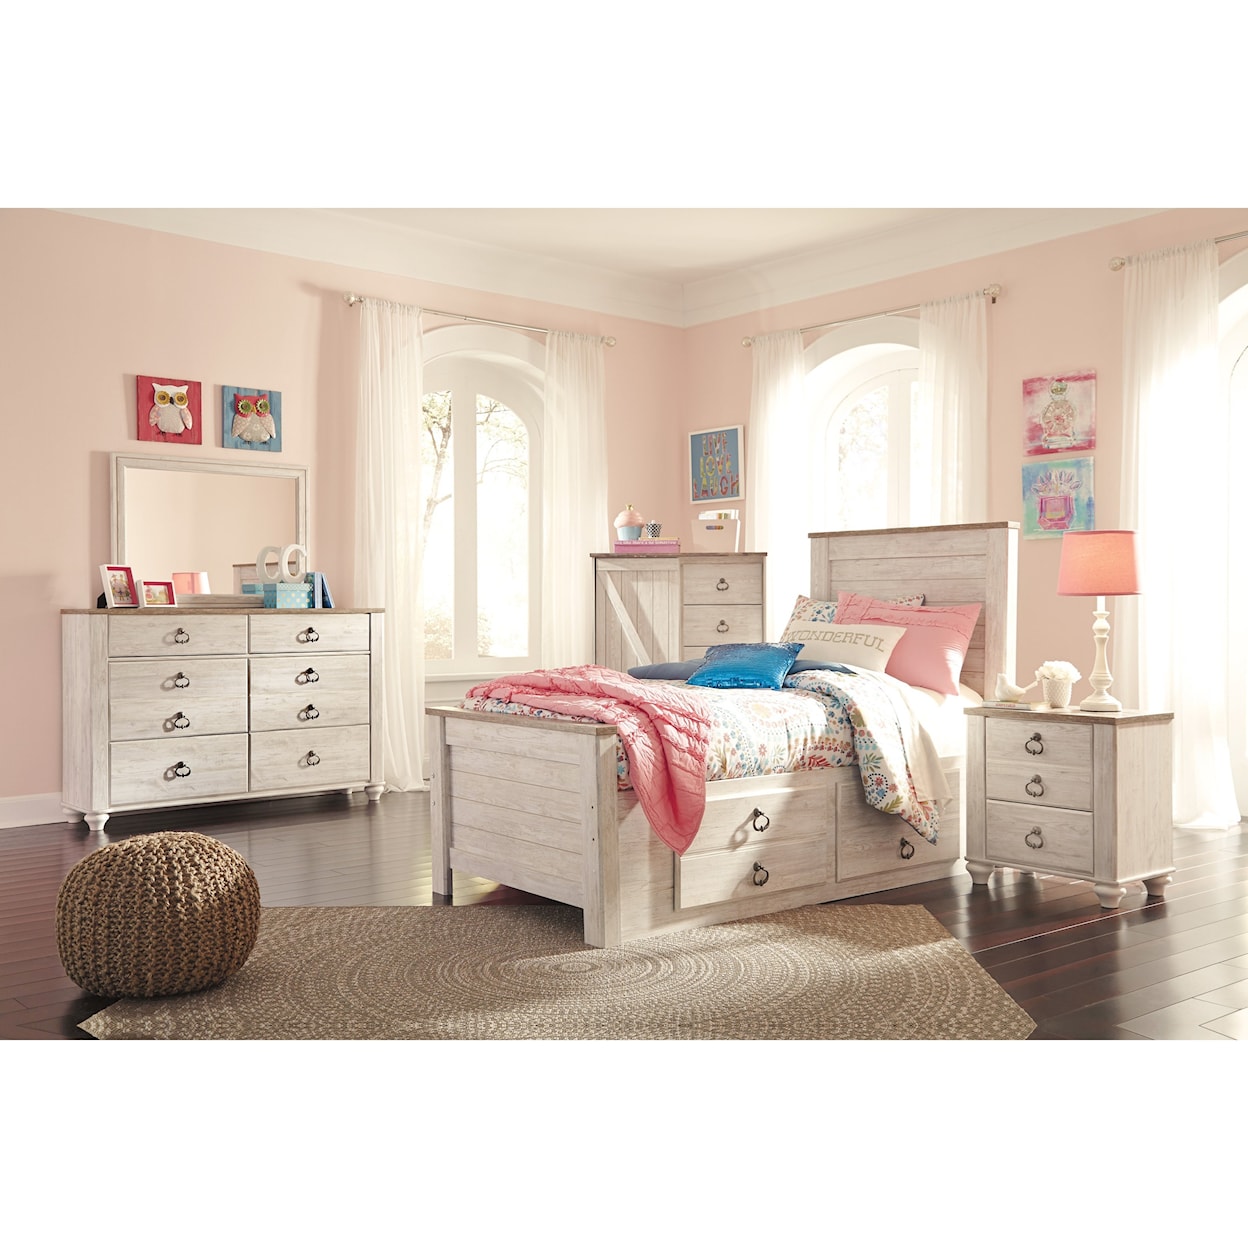 Signature Design Willowton Twin Bed with Underbed Storage Drawers